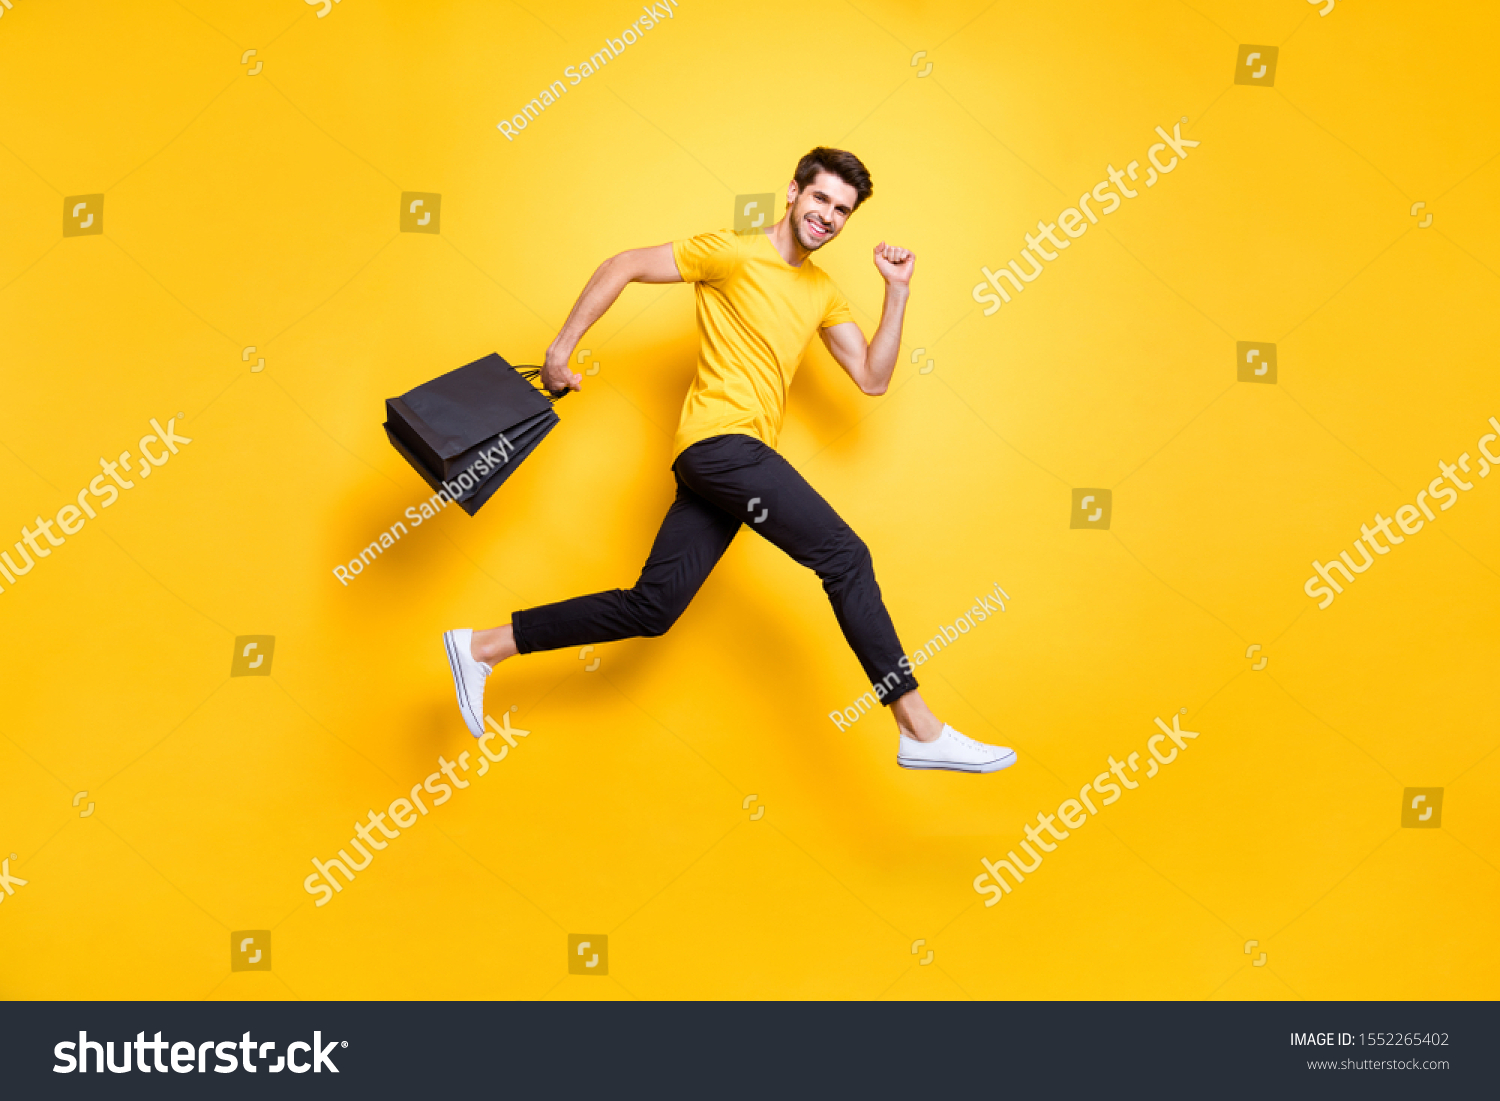 Full Size Photo Handsome Guy Jumping Stock Photo 1552265402 | Shutterstock